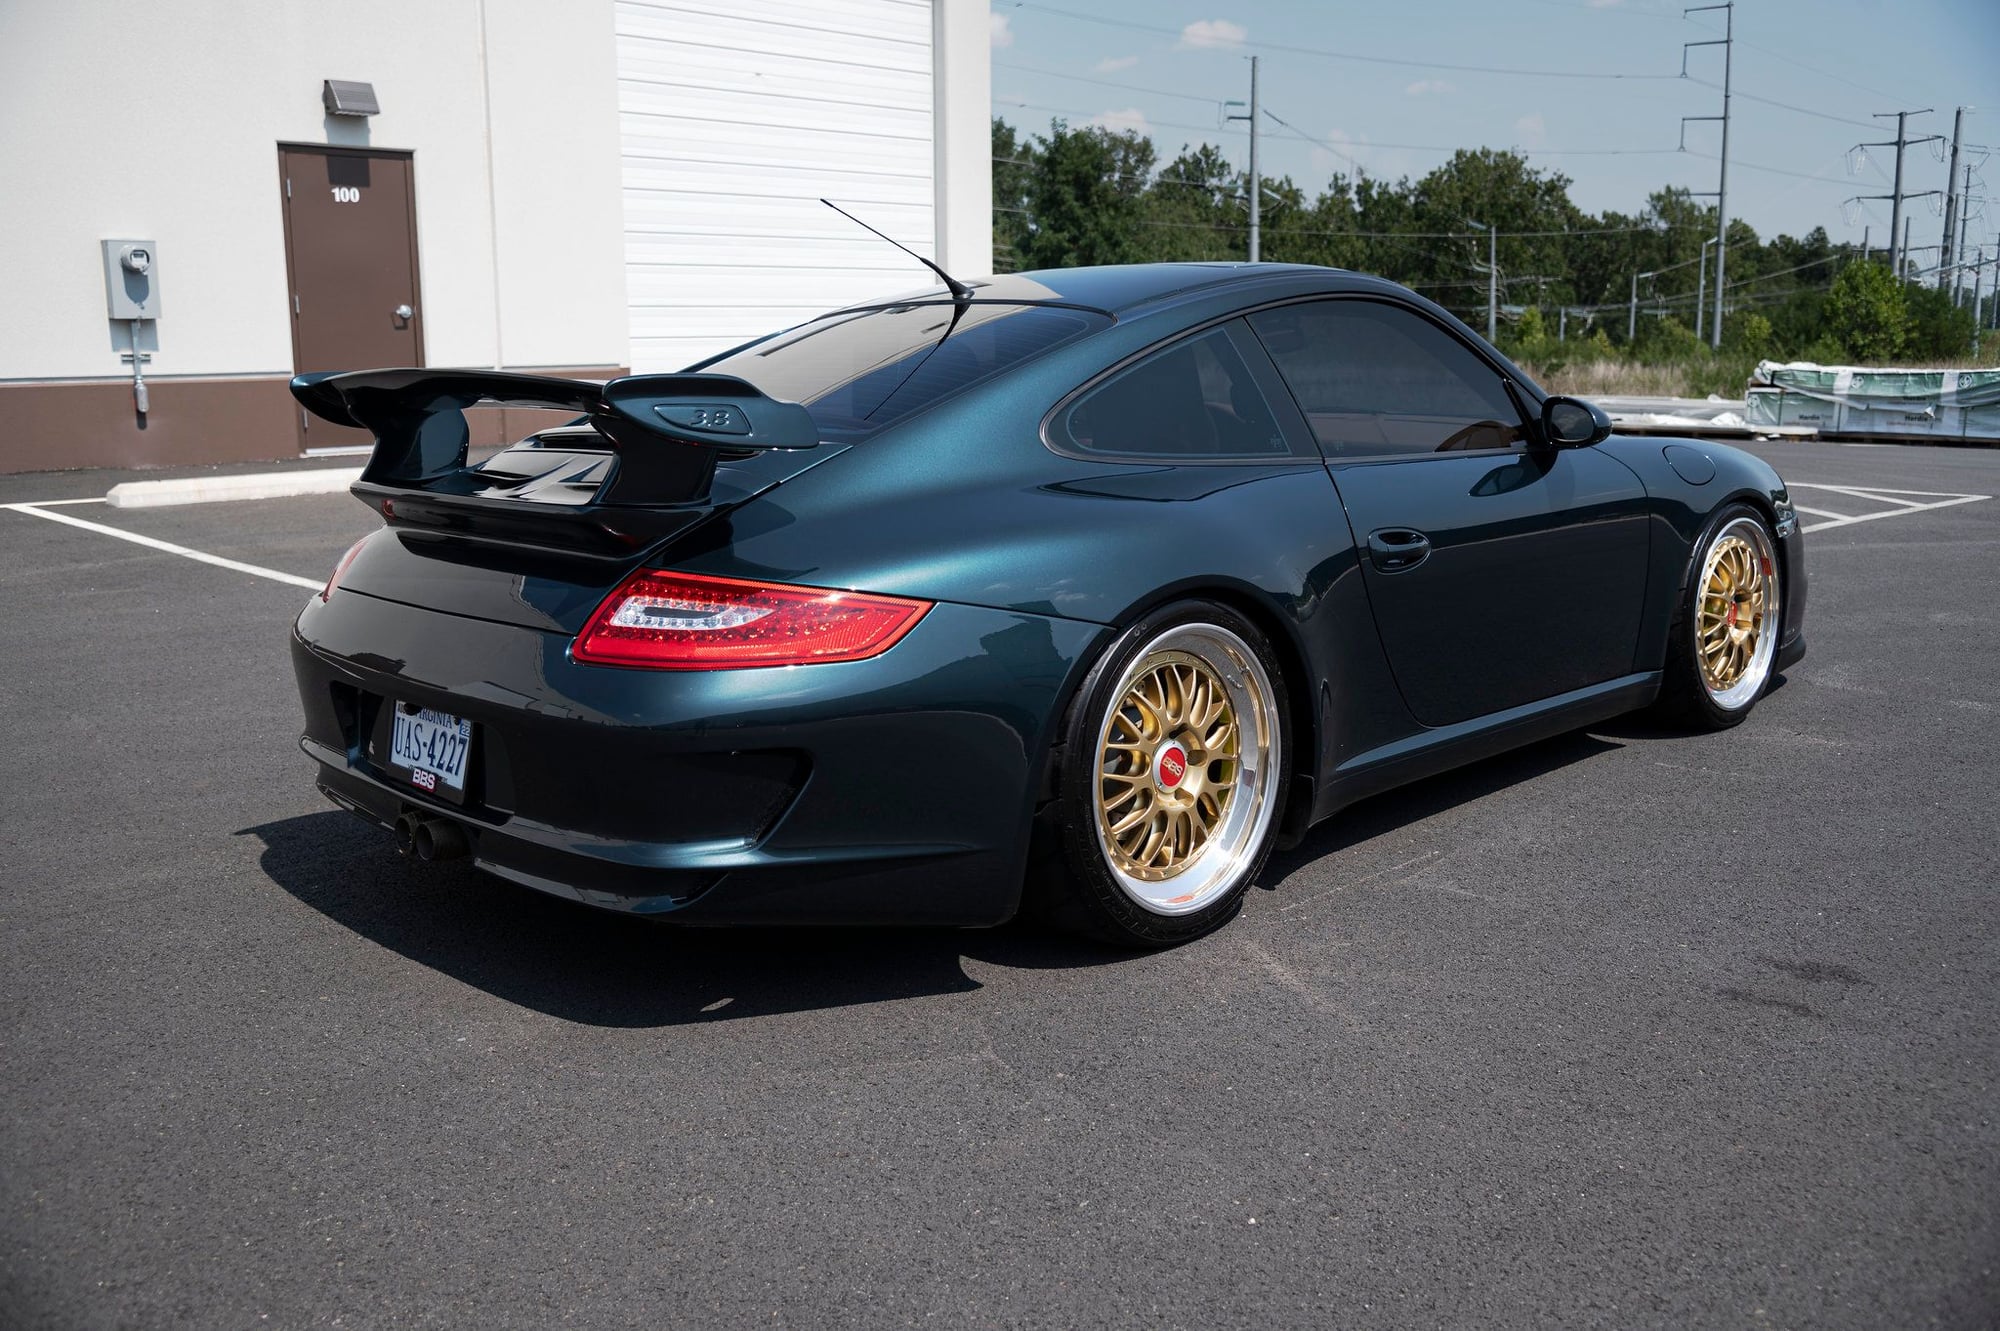 2005 Porsche 911 - Green 997- Coupe, Manual transmission for sale. - Used - VIN WP0AA29945S716572 - 40,500 Miles - 6 cyl - 2WD - Manual - Coupe - Other - Plano, TX 75093, United States